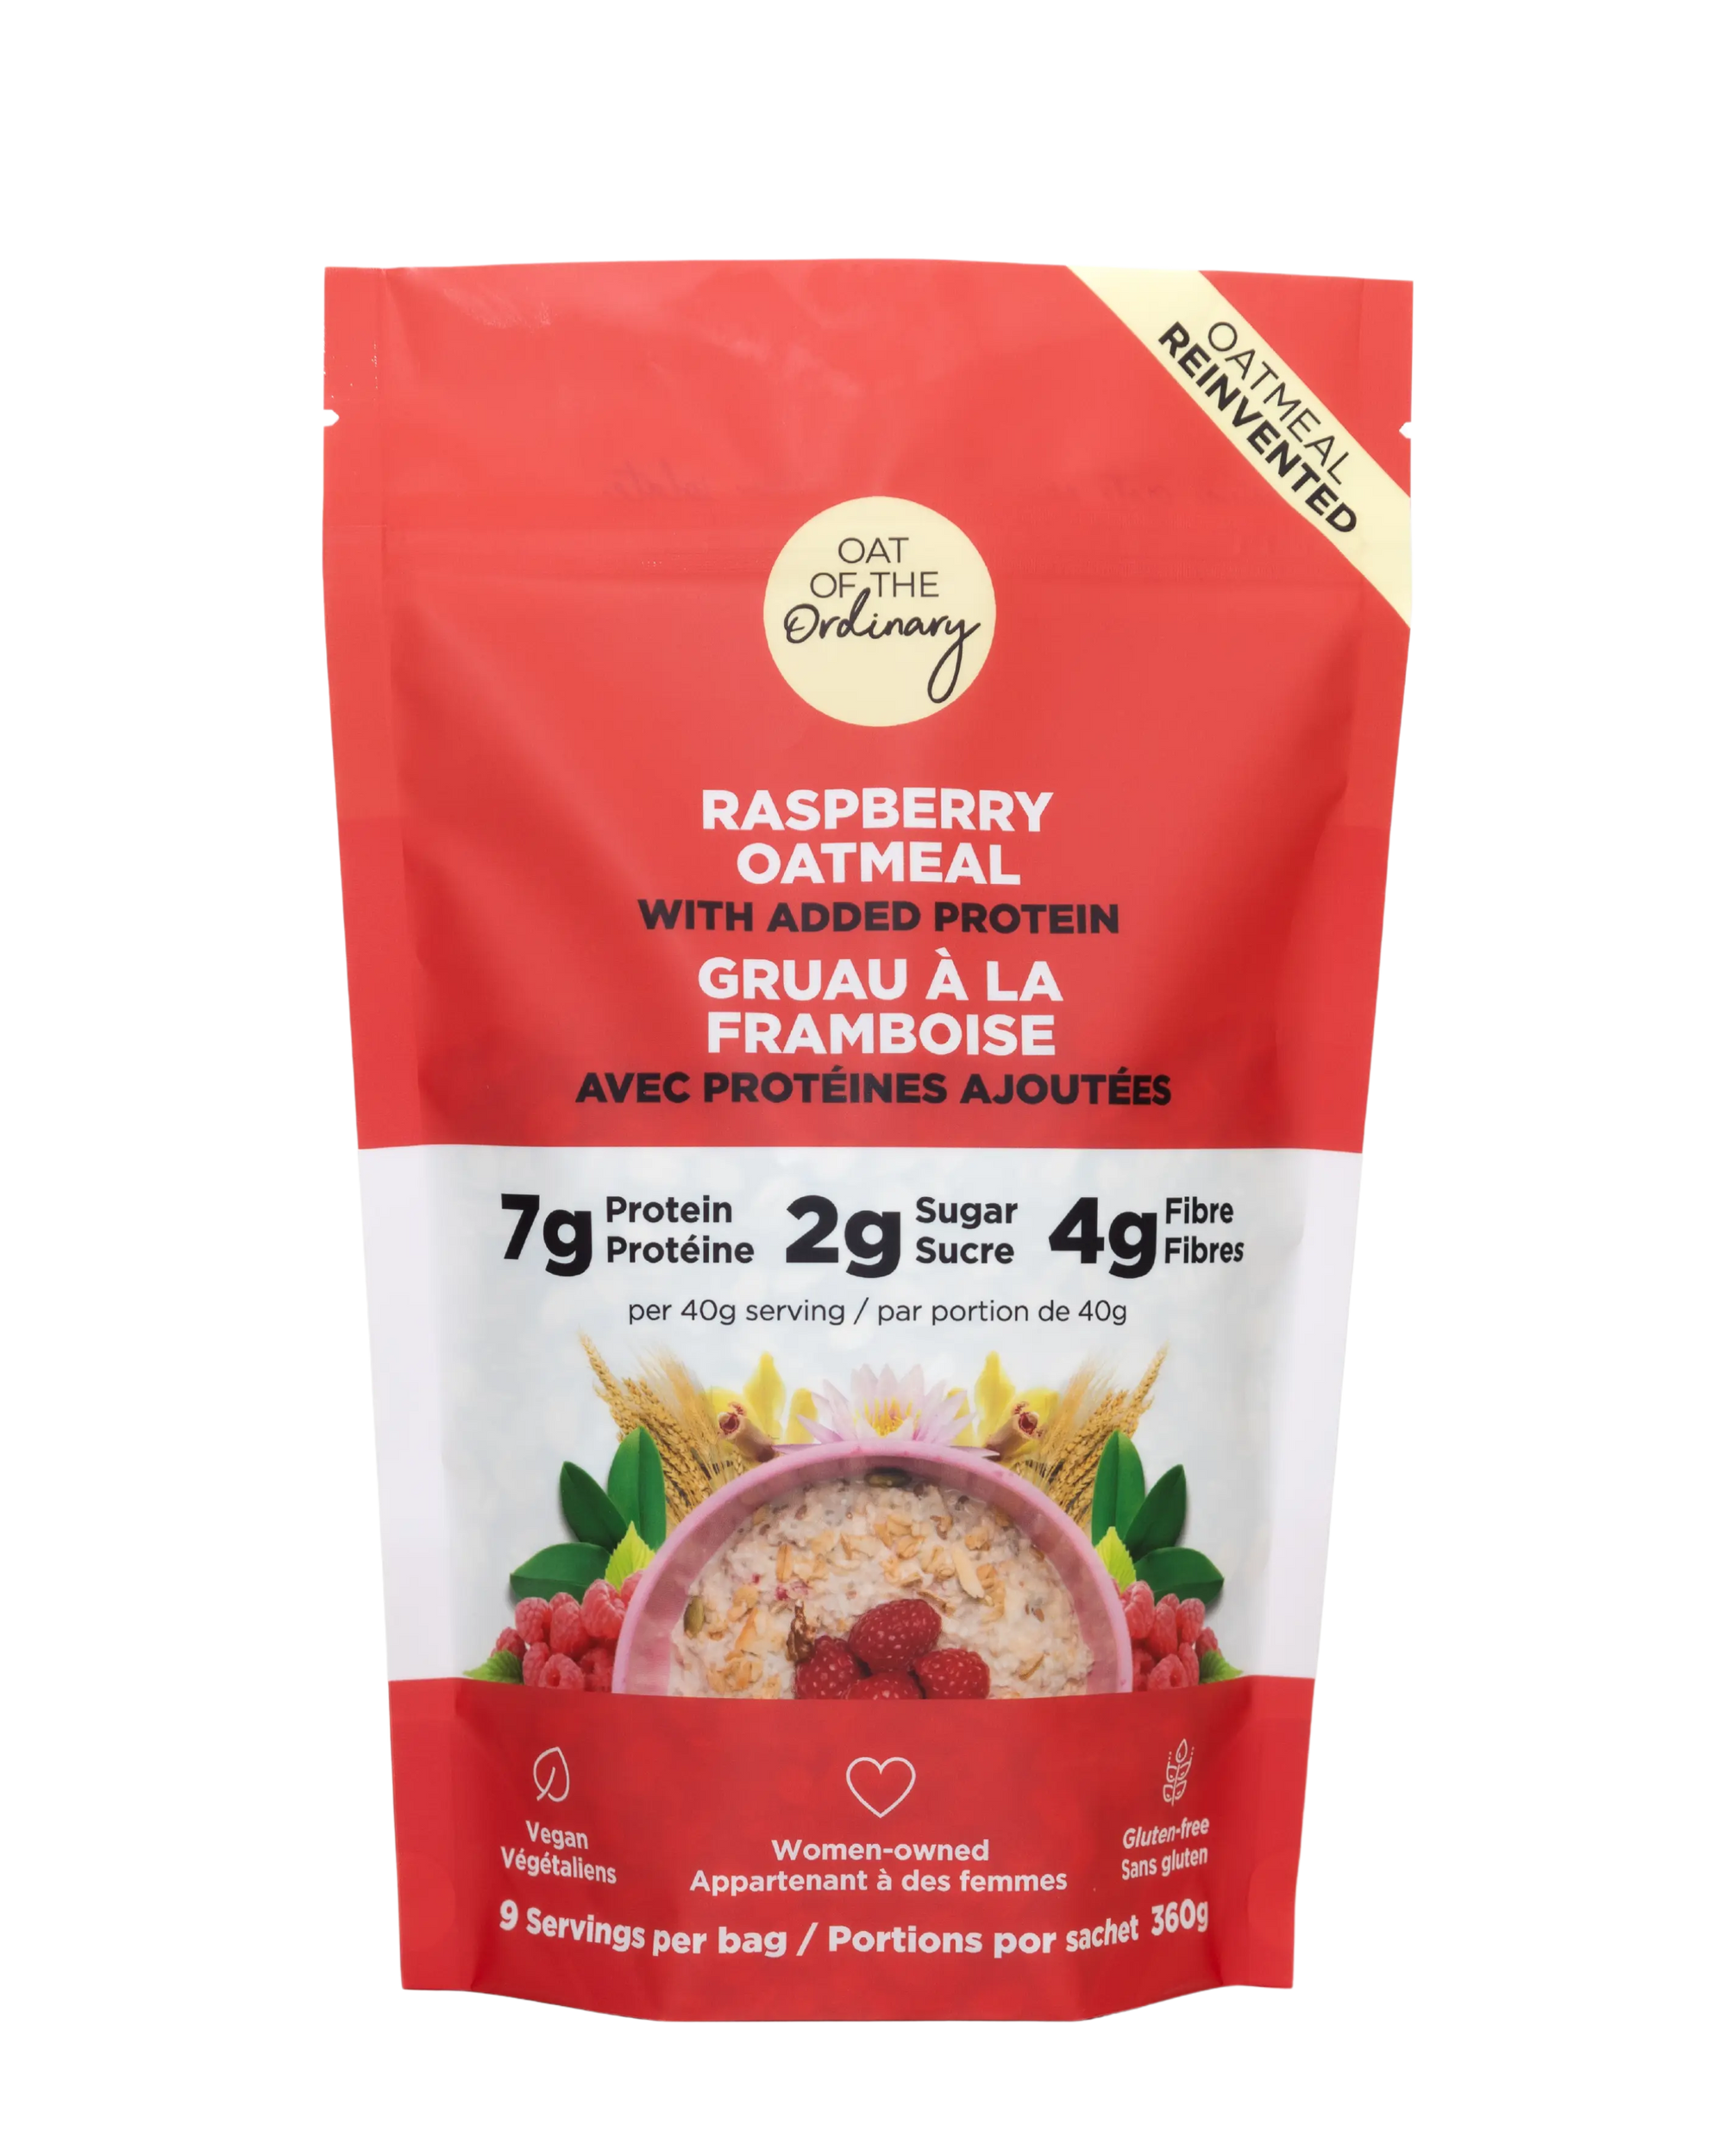 Raspberry protein oatmeal multi-serve pouch.